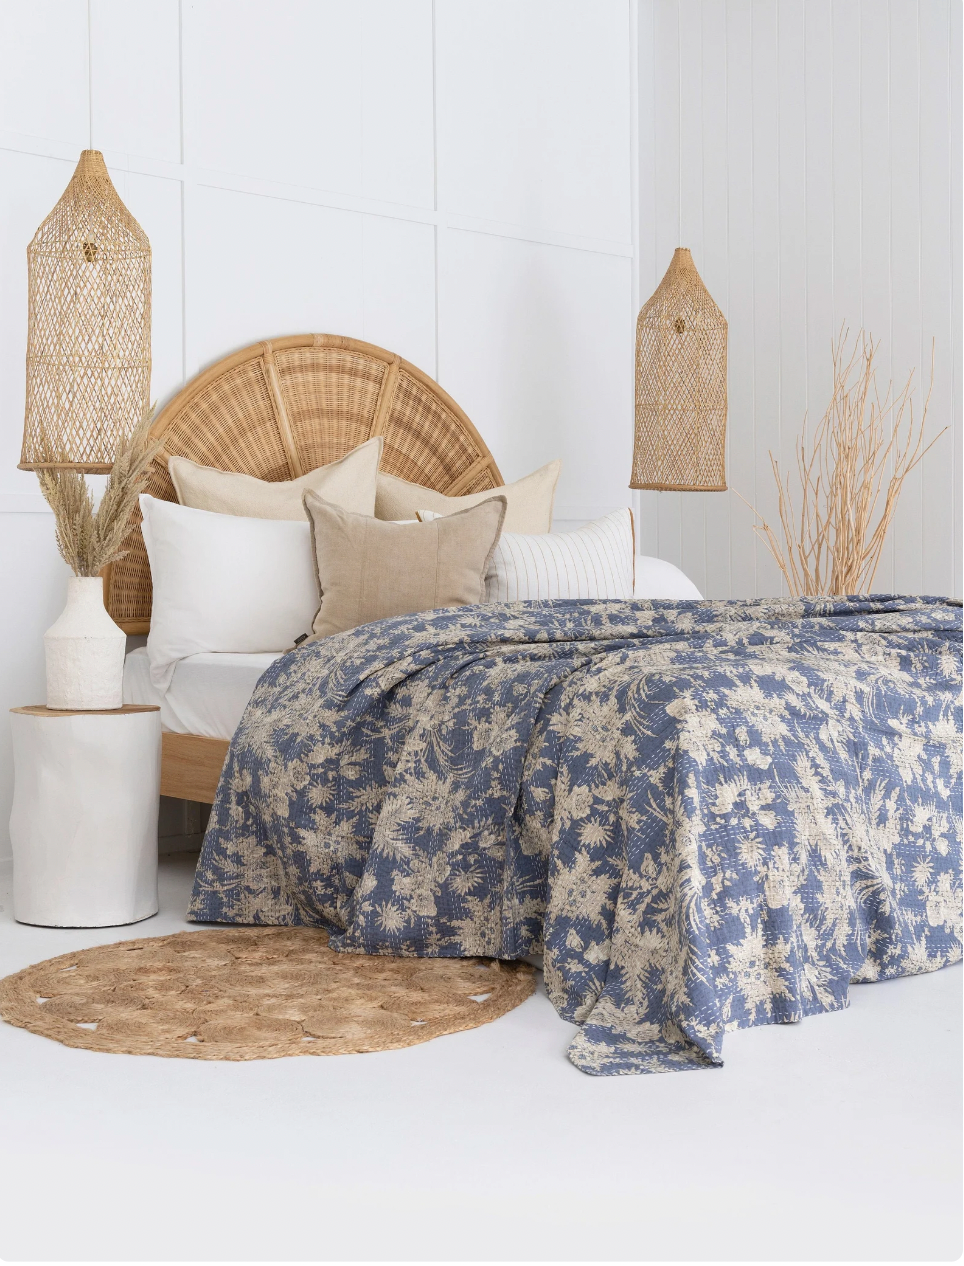 Periwinkle Block Print Bedspread with Kantha Stitch